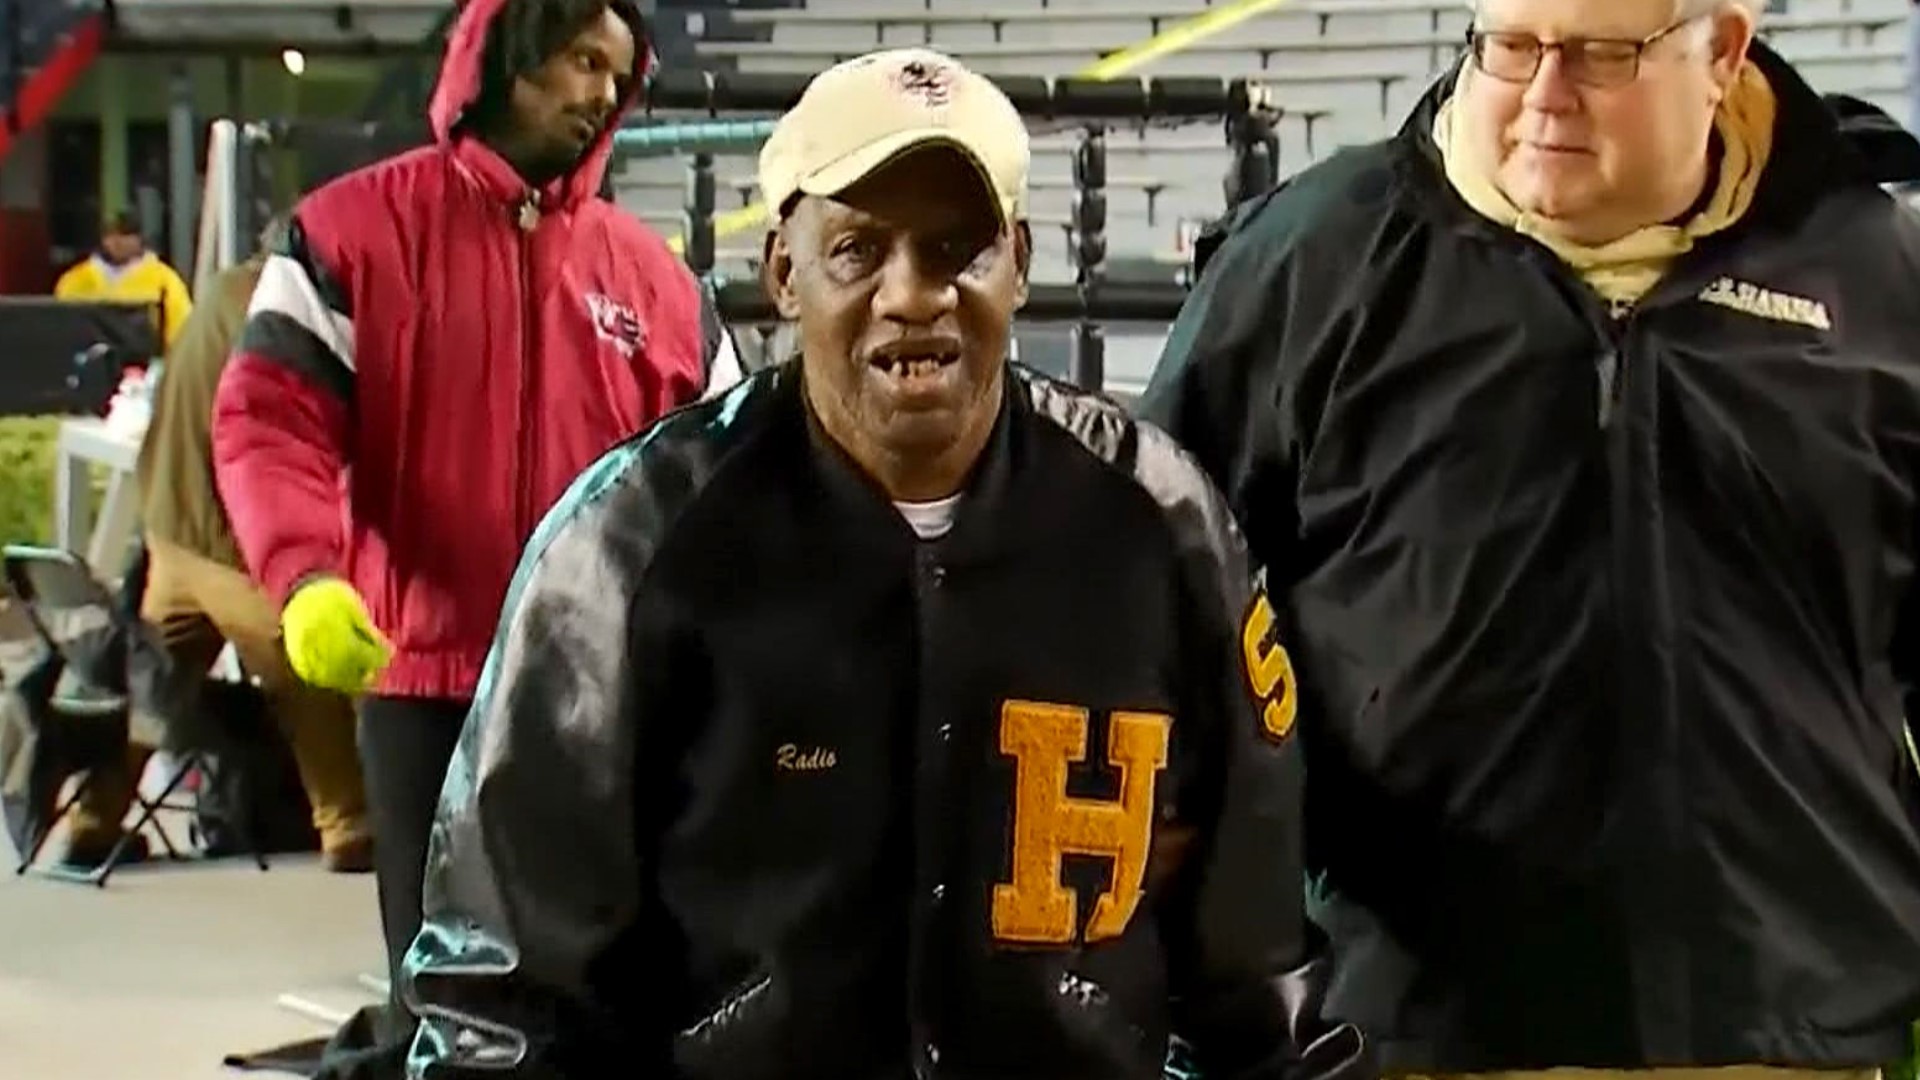 James 'Radio' Kennedy, who became famous for his love of T.L. Hanna High's football team and whose life story was turned into a Hollywood movie, has died.